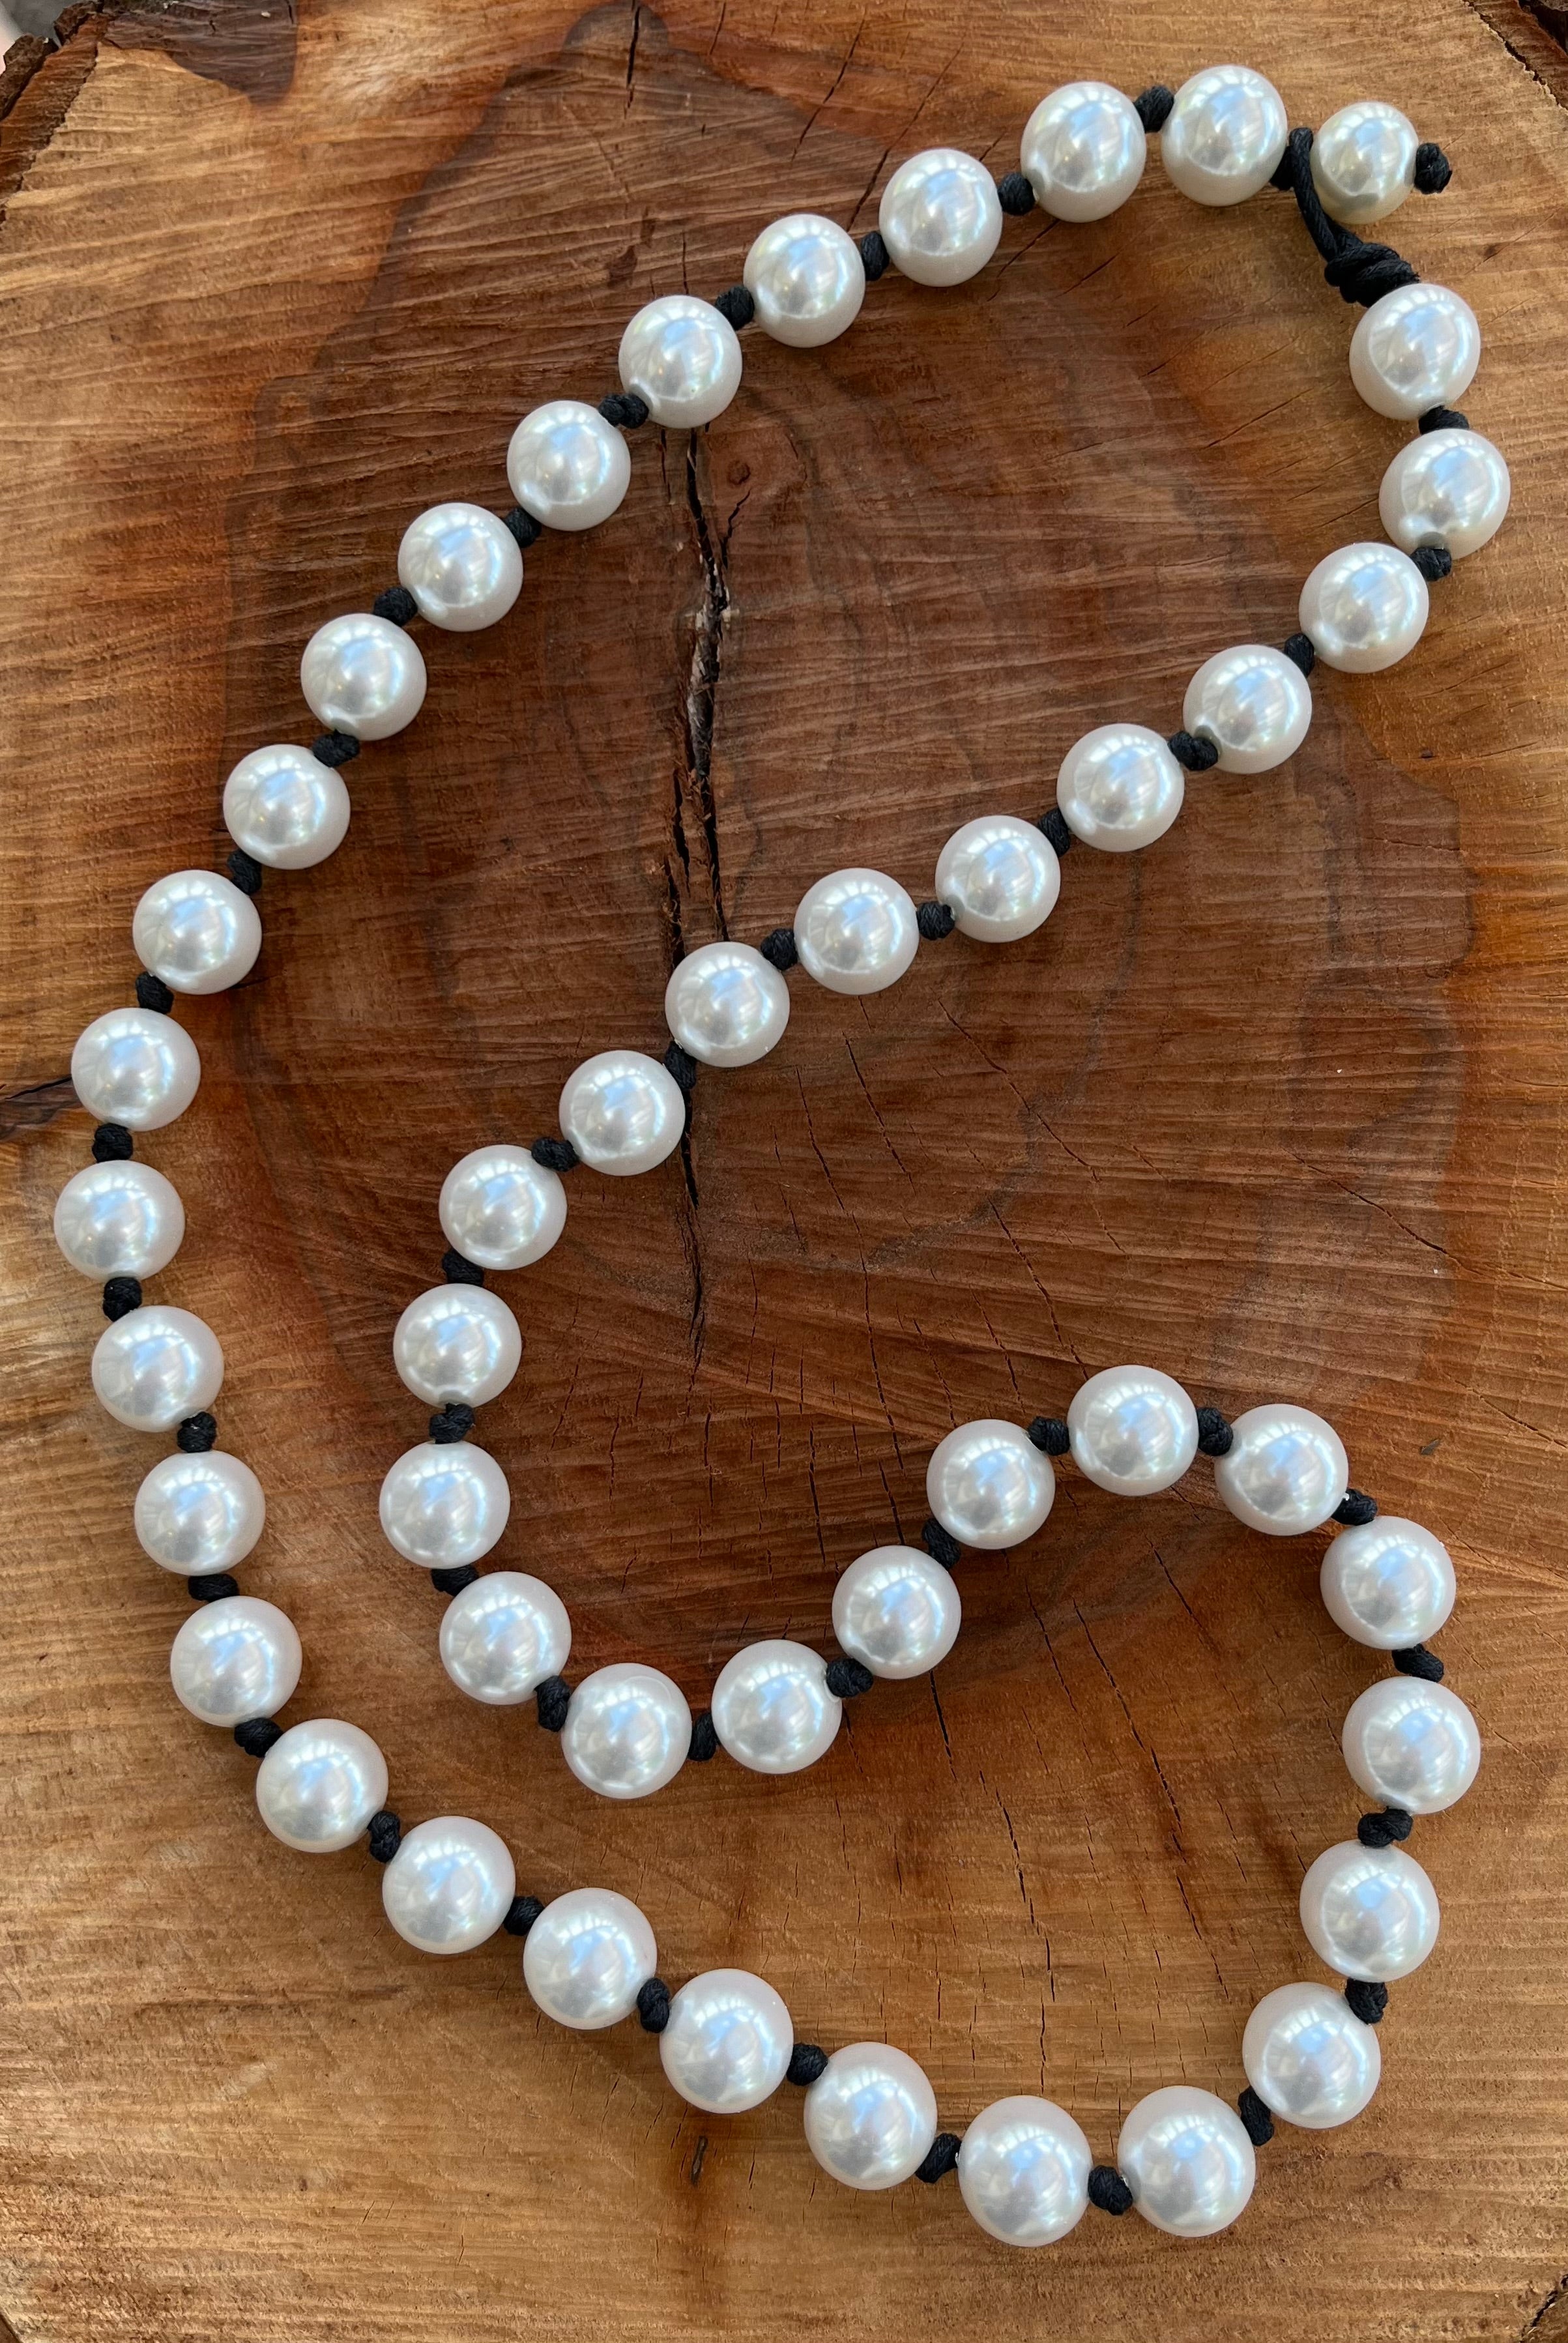 33" Round Pearl-like Bead w/ Balck Leather Knots Necklace